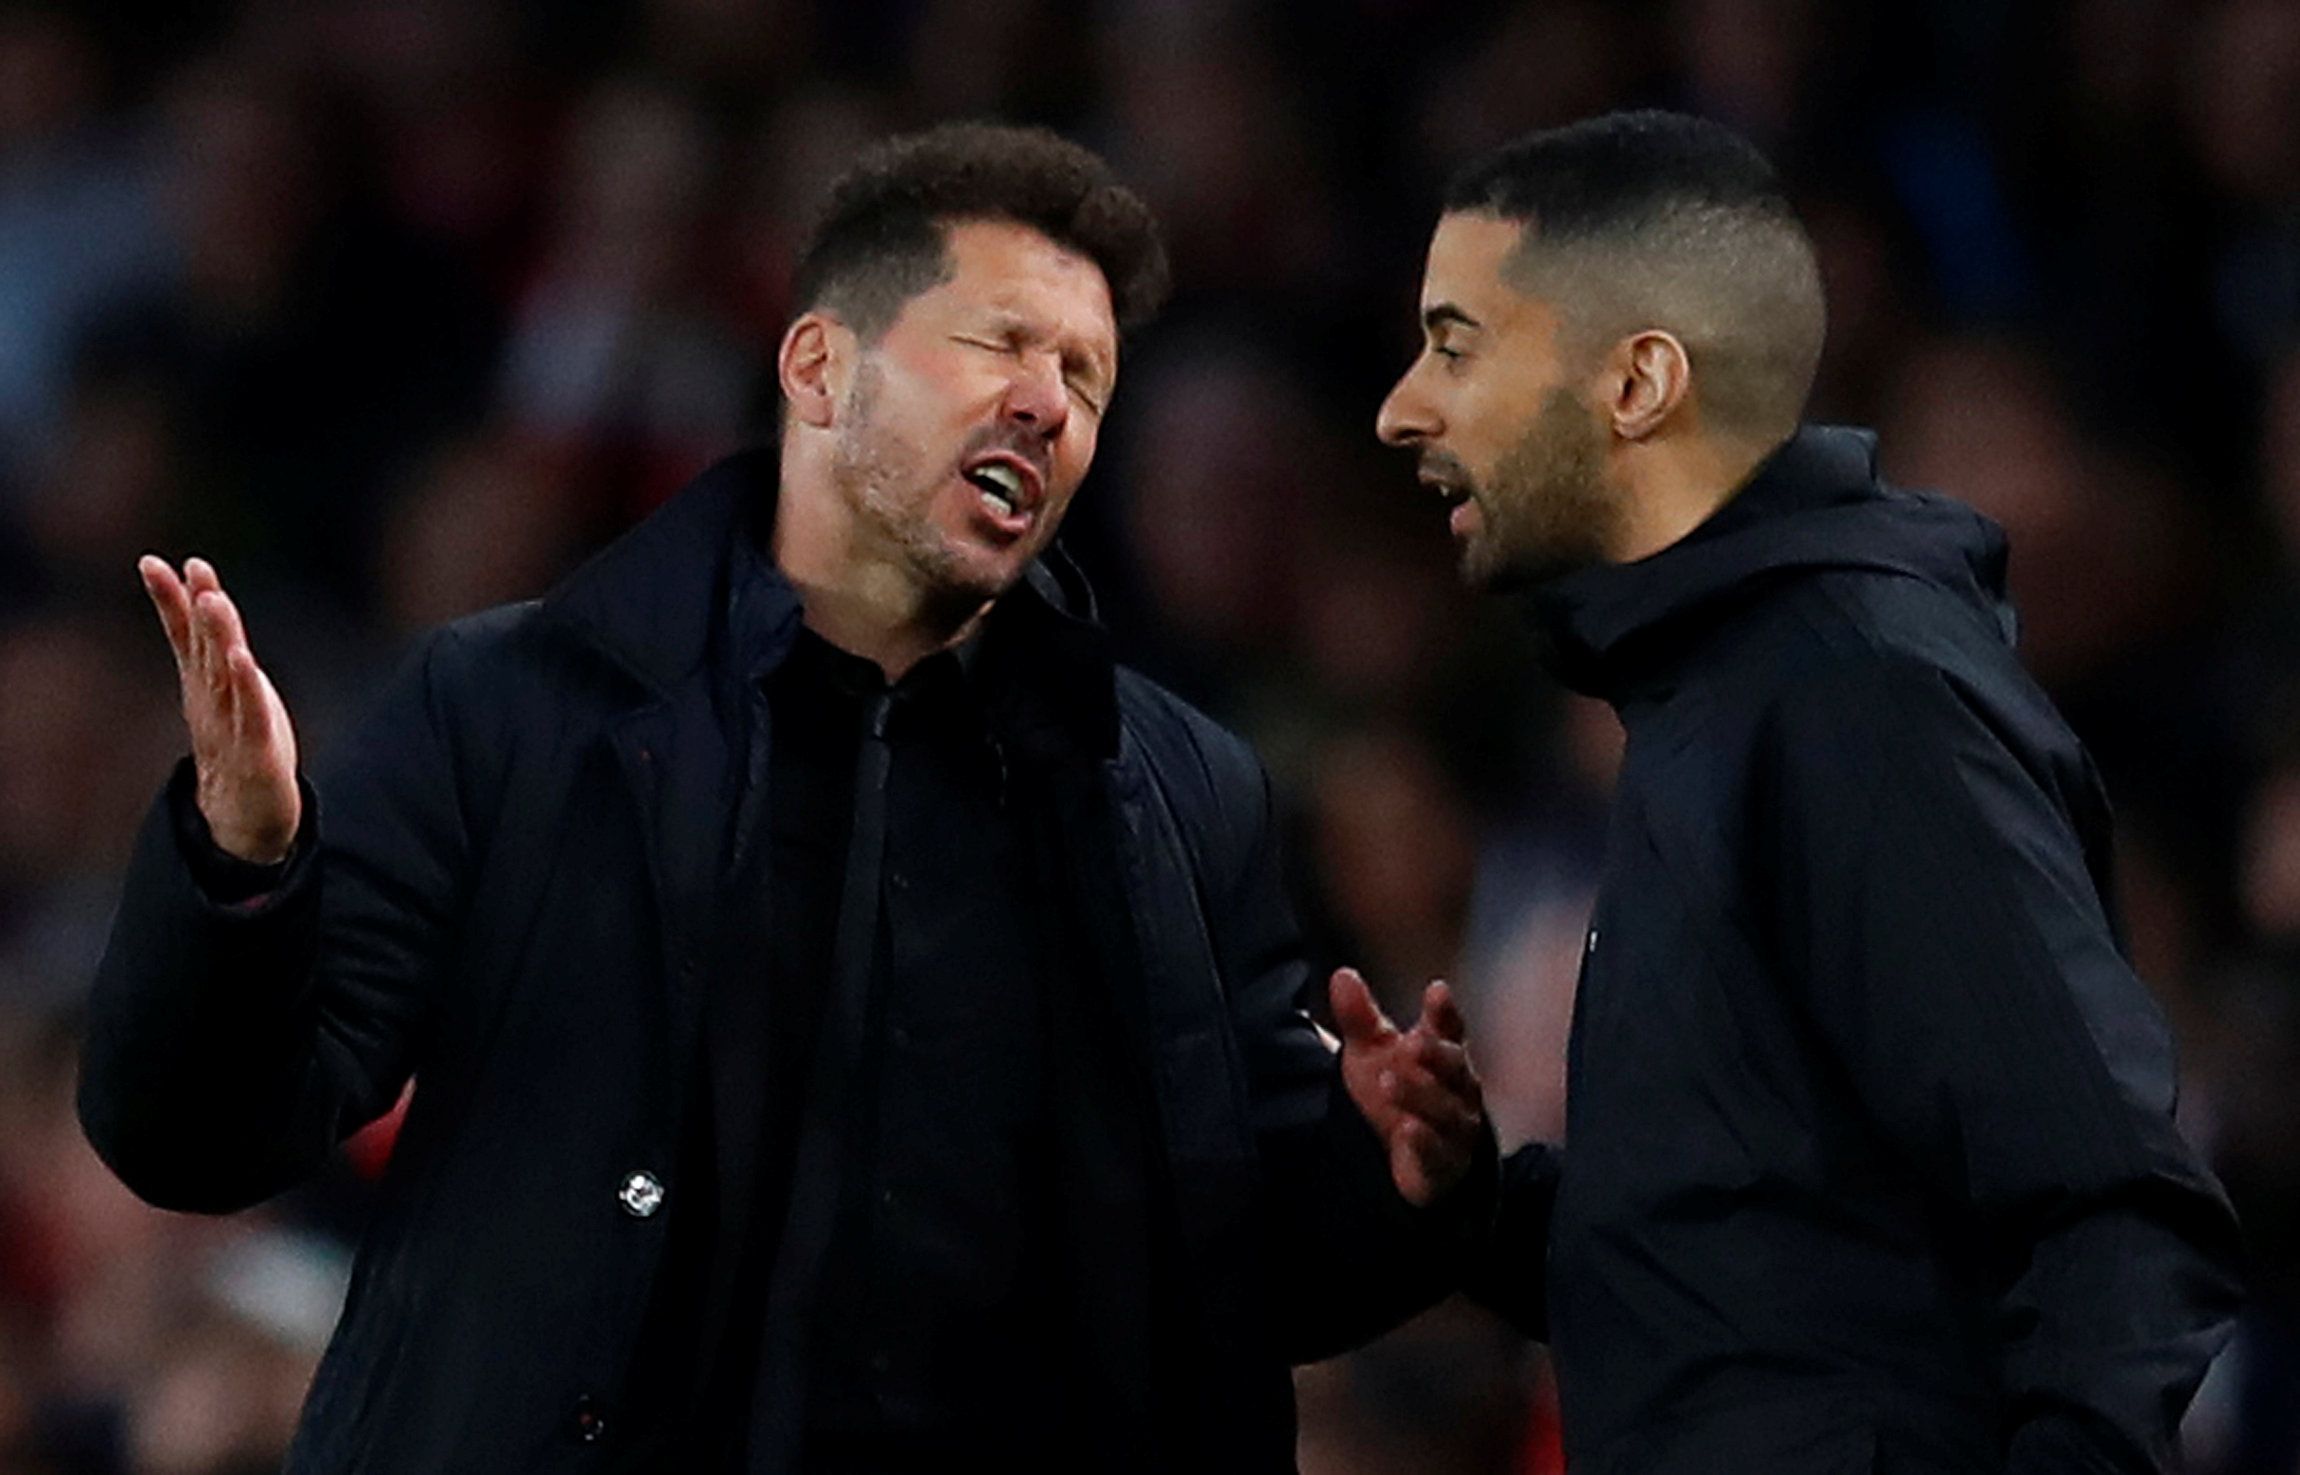 Soccer Football - Europa League Semi Final First Leg - Arsenal vs Atletico Madrid - Emirates Stadium, London, Britain - April 26, 2018   Atletico Madrid coach Diego Simeone reacts after being sent to the stands   REUTERS/Eddie Keogh